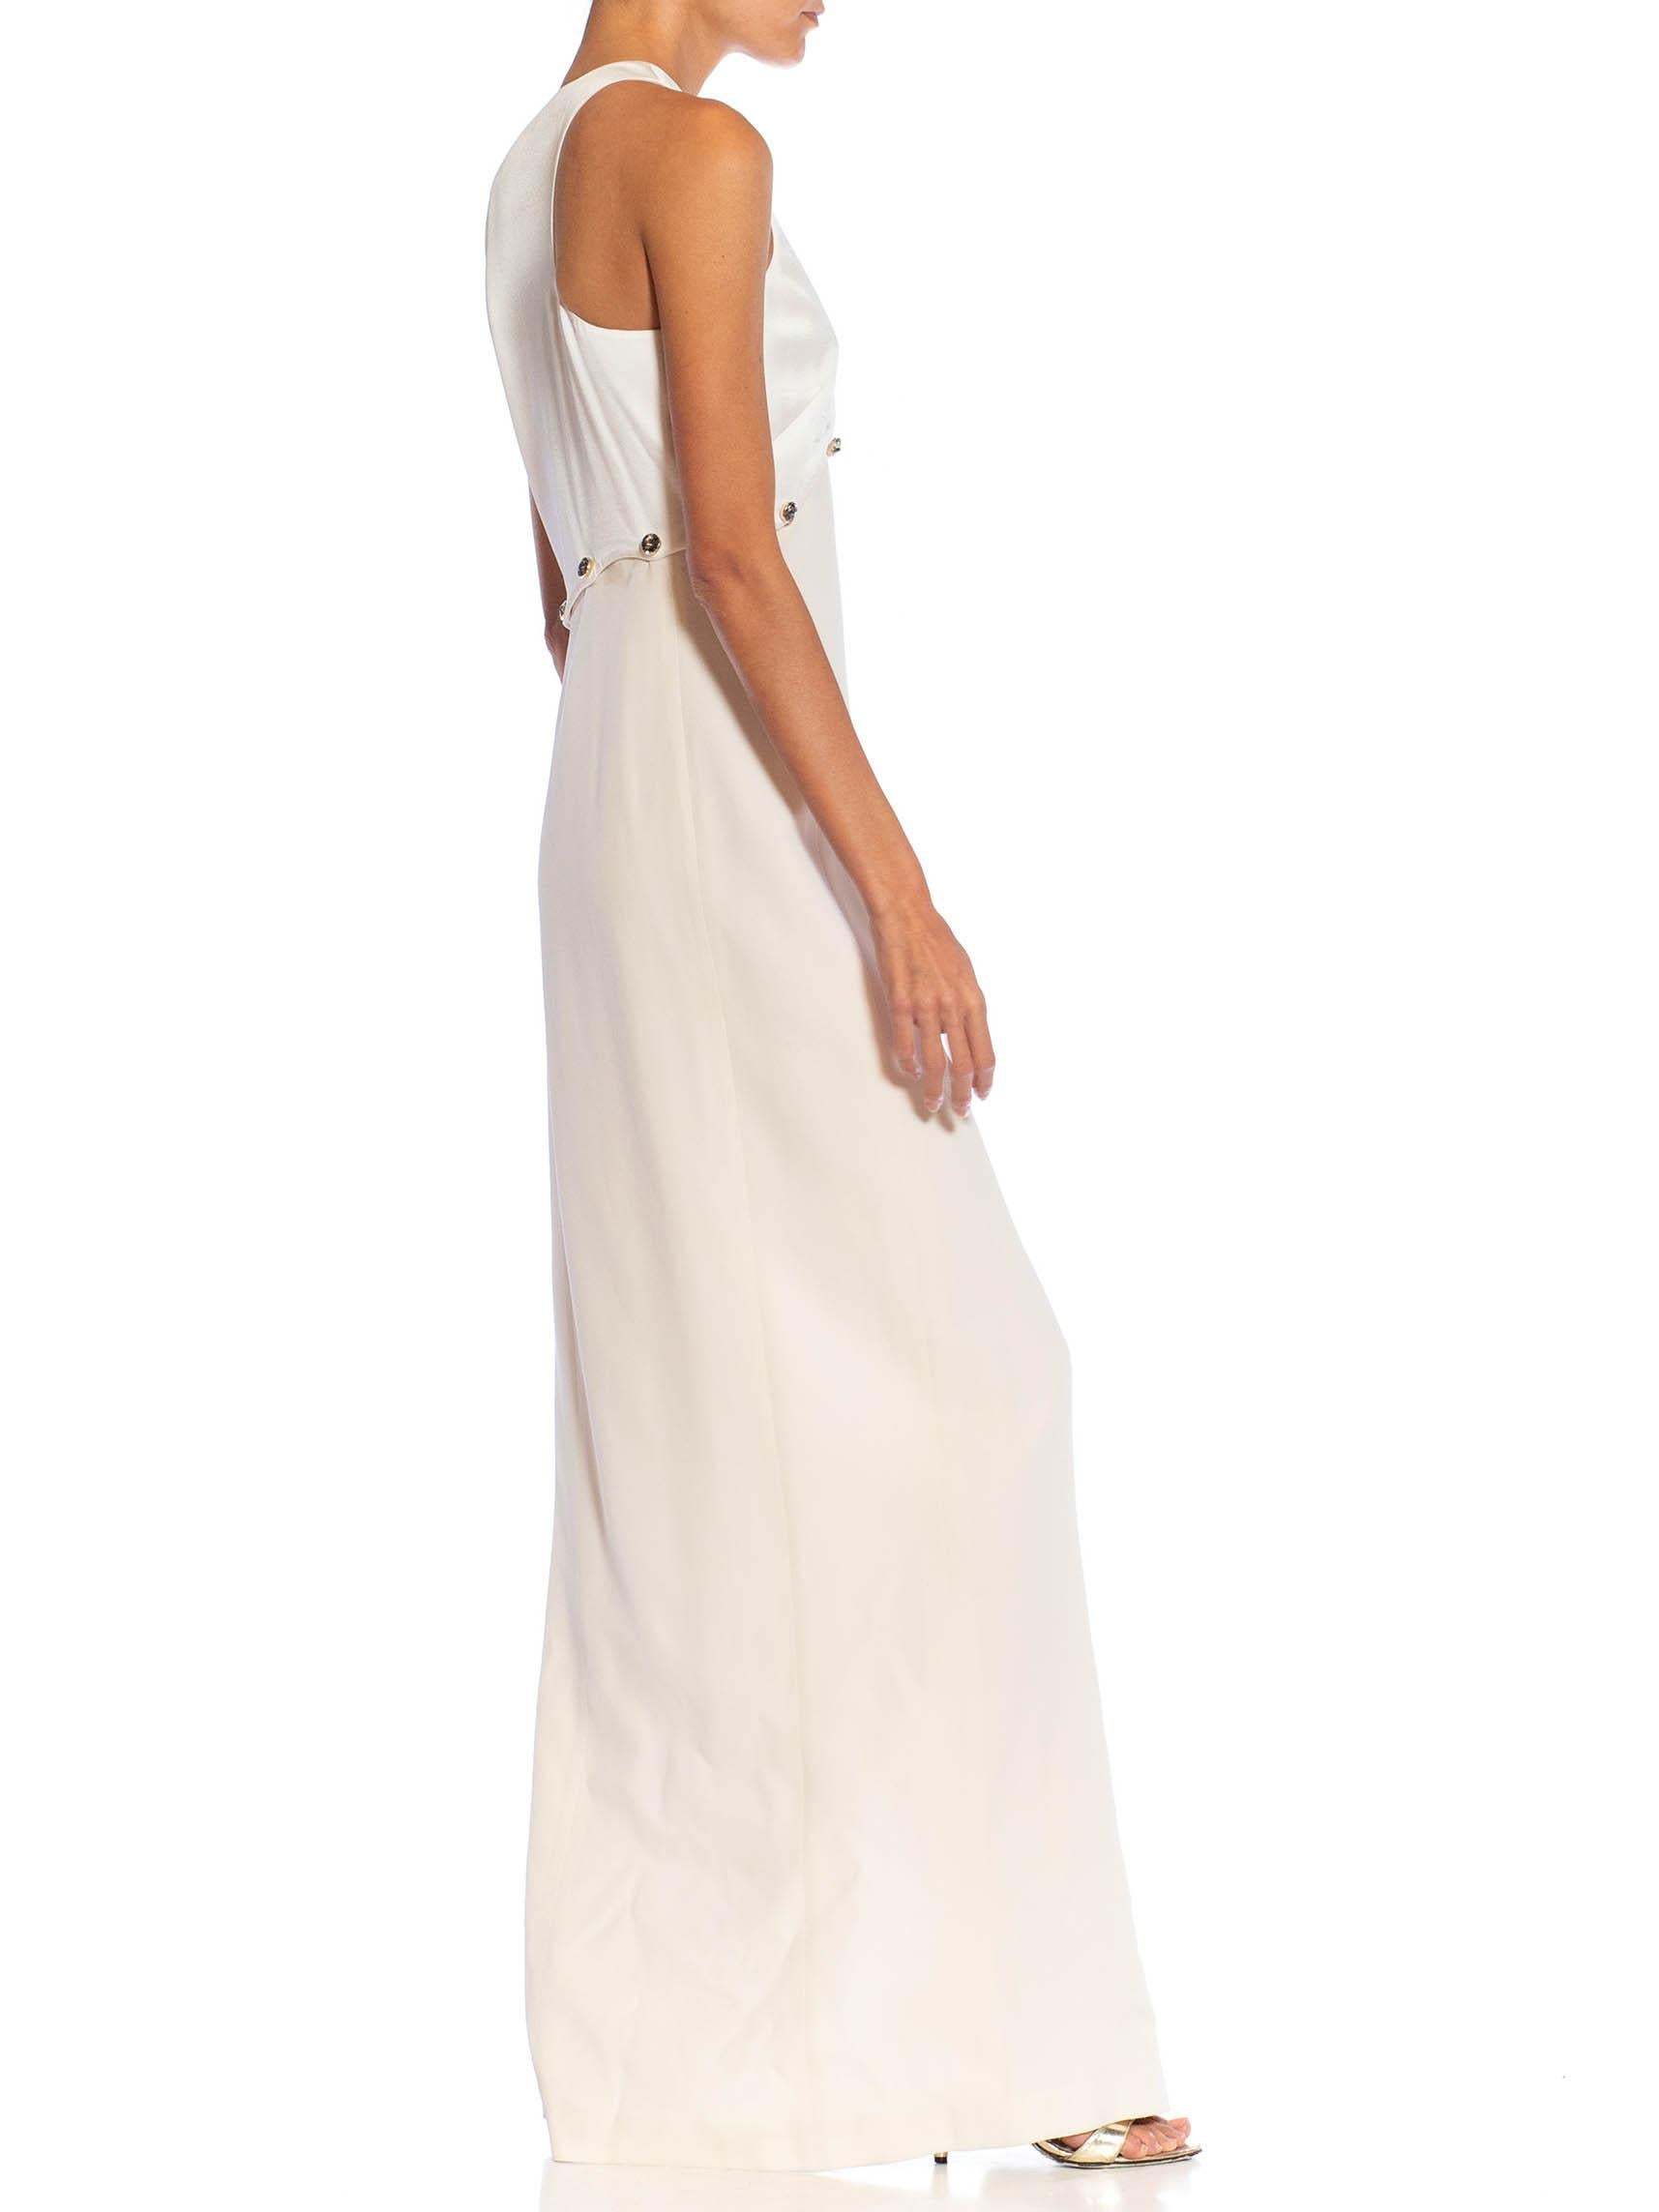 Women's 2000S VERSACE Off White Silk Blend High Slit Gown For Sale